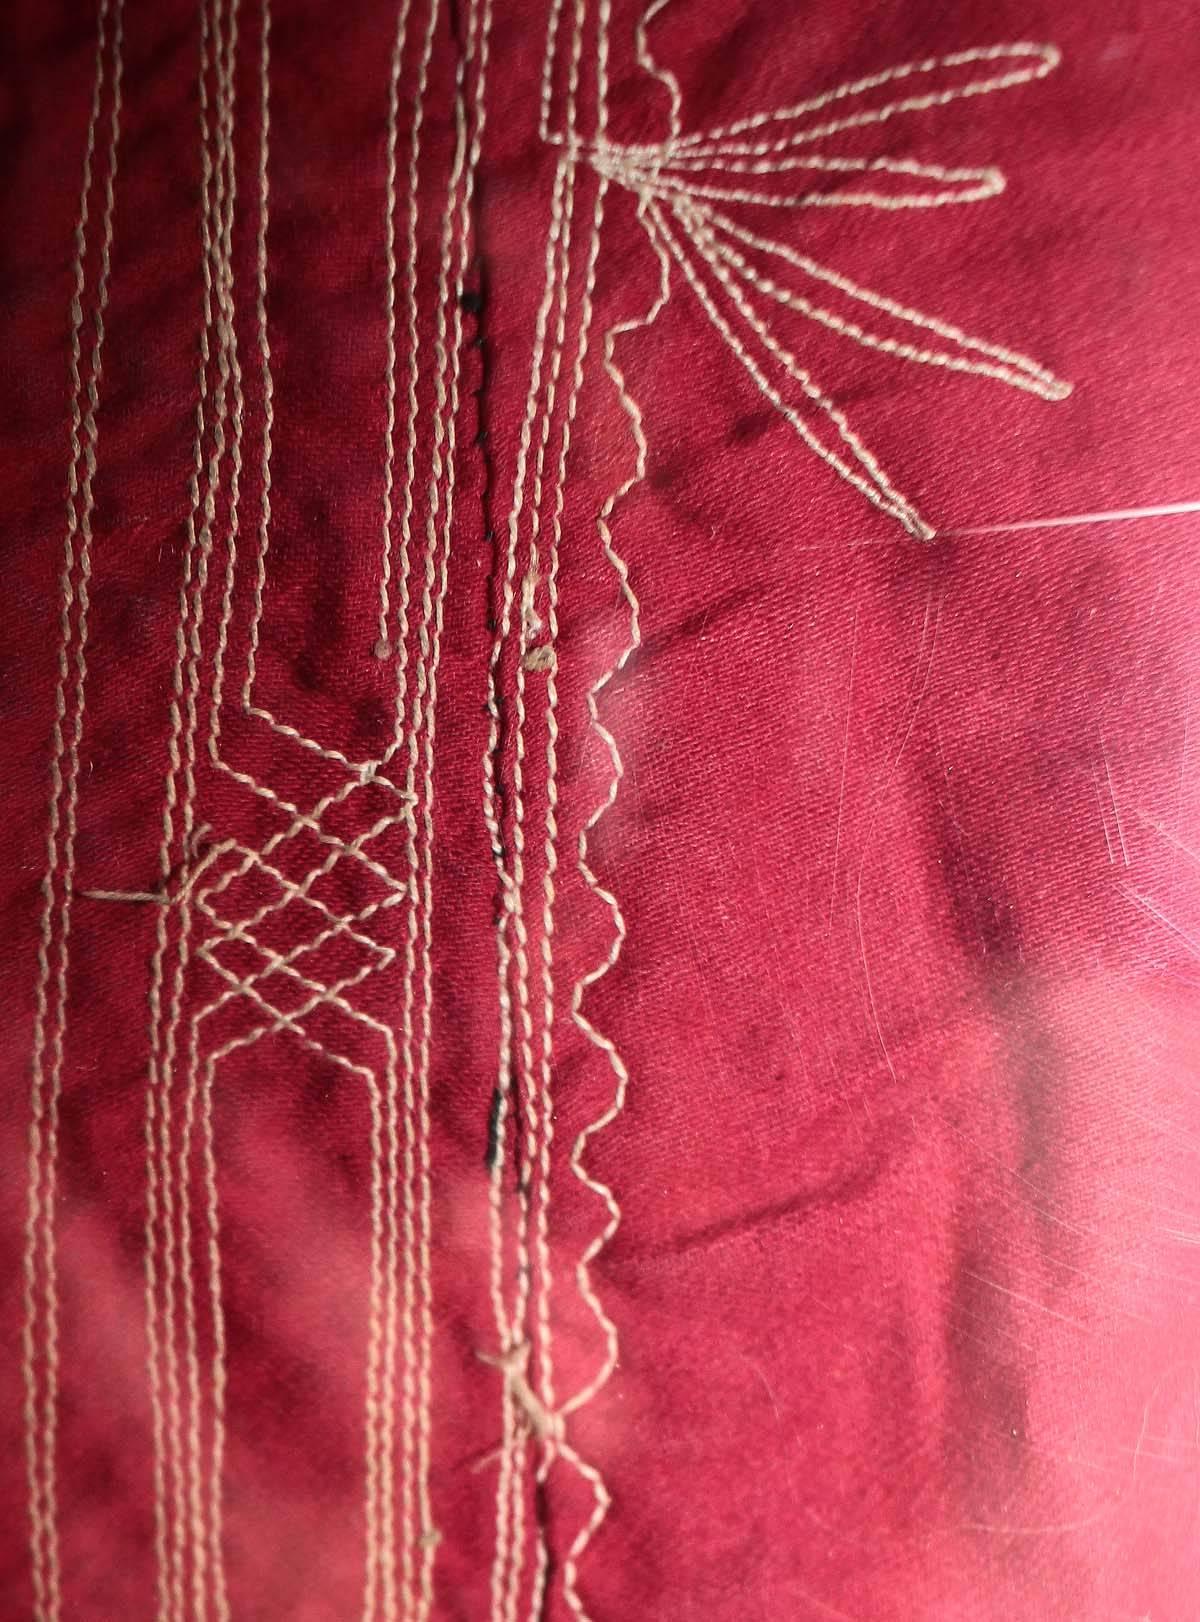 19th Century, Silk Bordered Caftan In Excellent Condition For Sale In Sag Harbor, NY